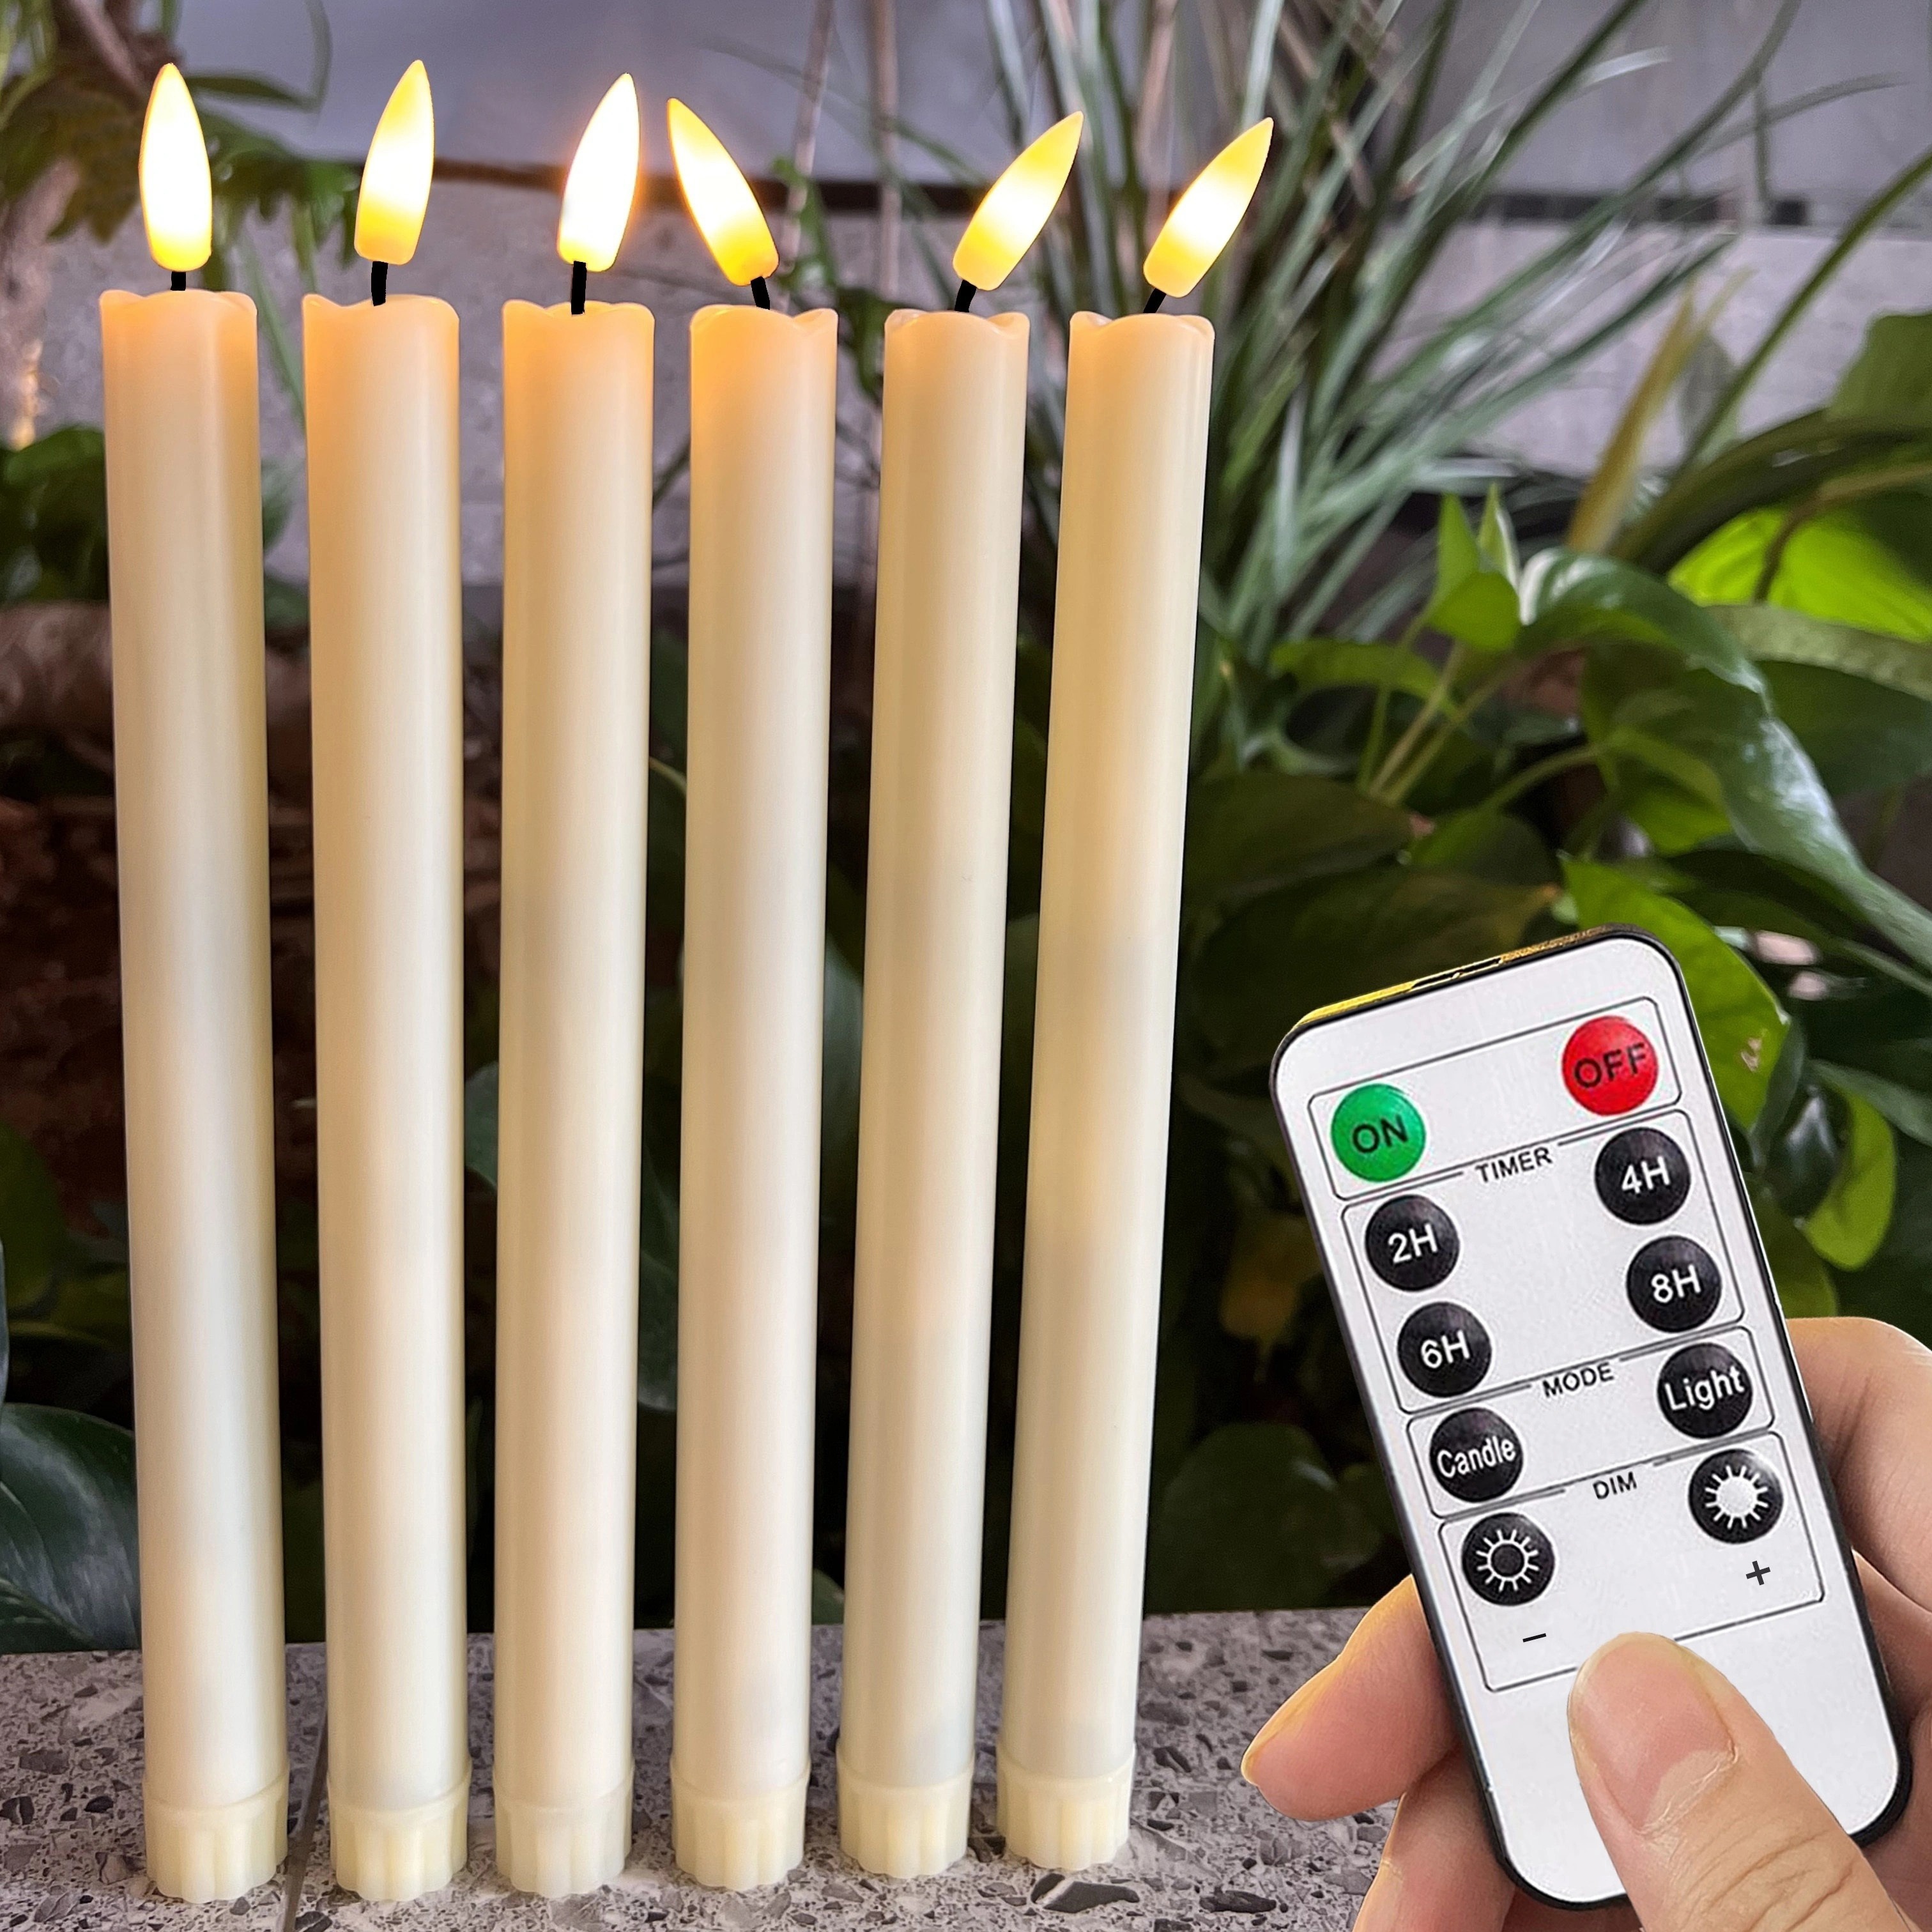 

6pcs 3d Black Wick Led Battery Operated Flickering Flameless Taper Candles Light, With Remote &timer, Electric Fake Window Candle Like Real Wax, Realistic Candle Stick For Valentine's Day Table Decor